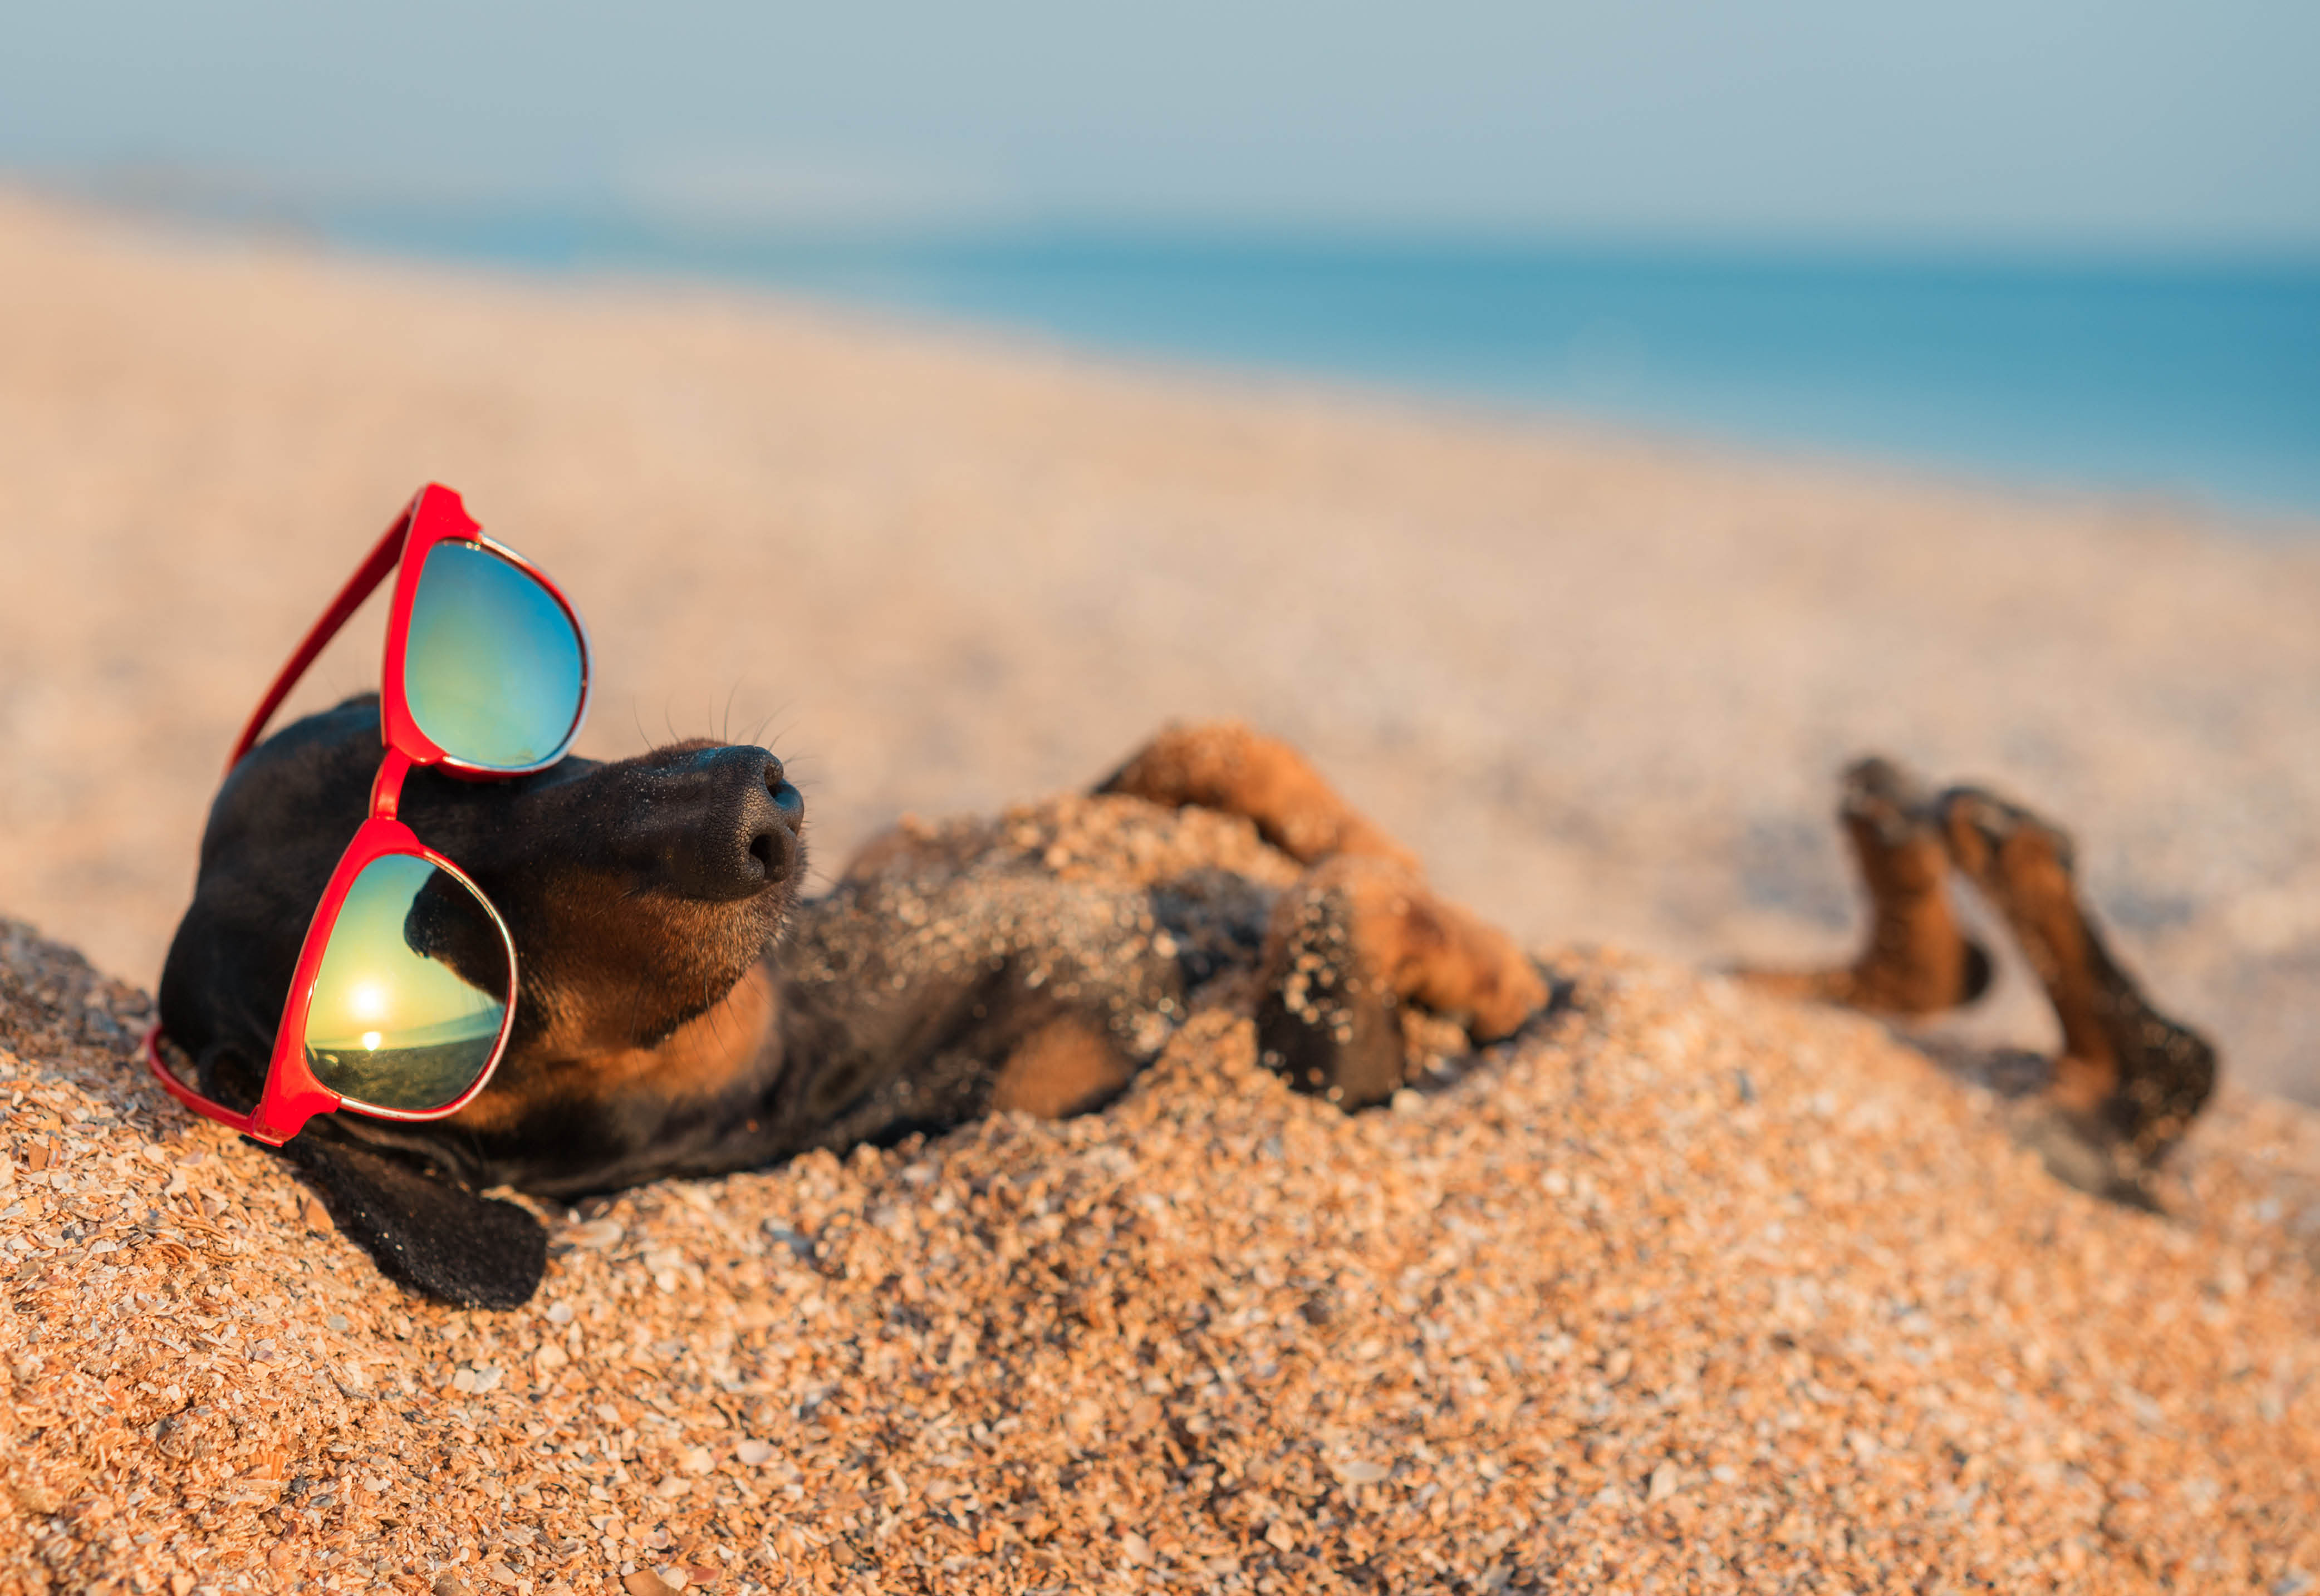 A dachshund wearing sunglasses lying in the sand at the beach